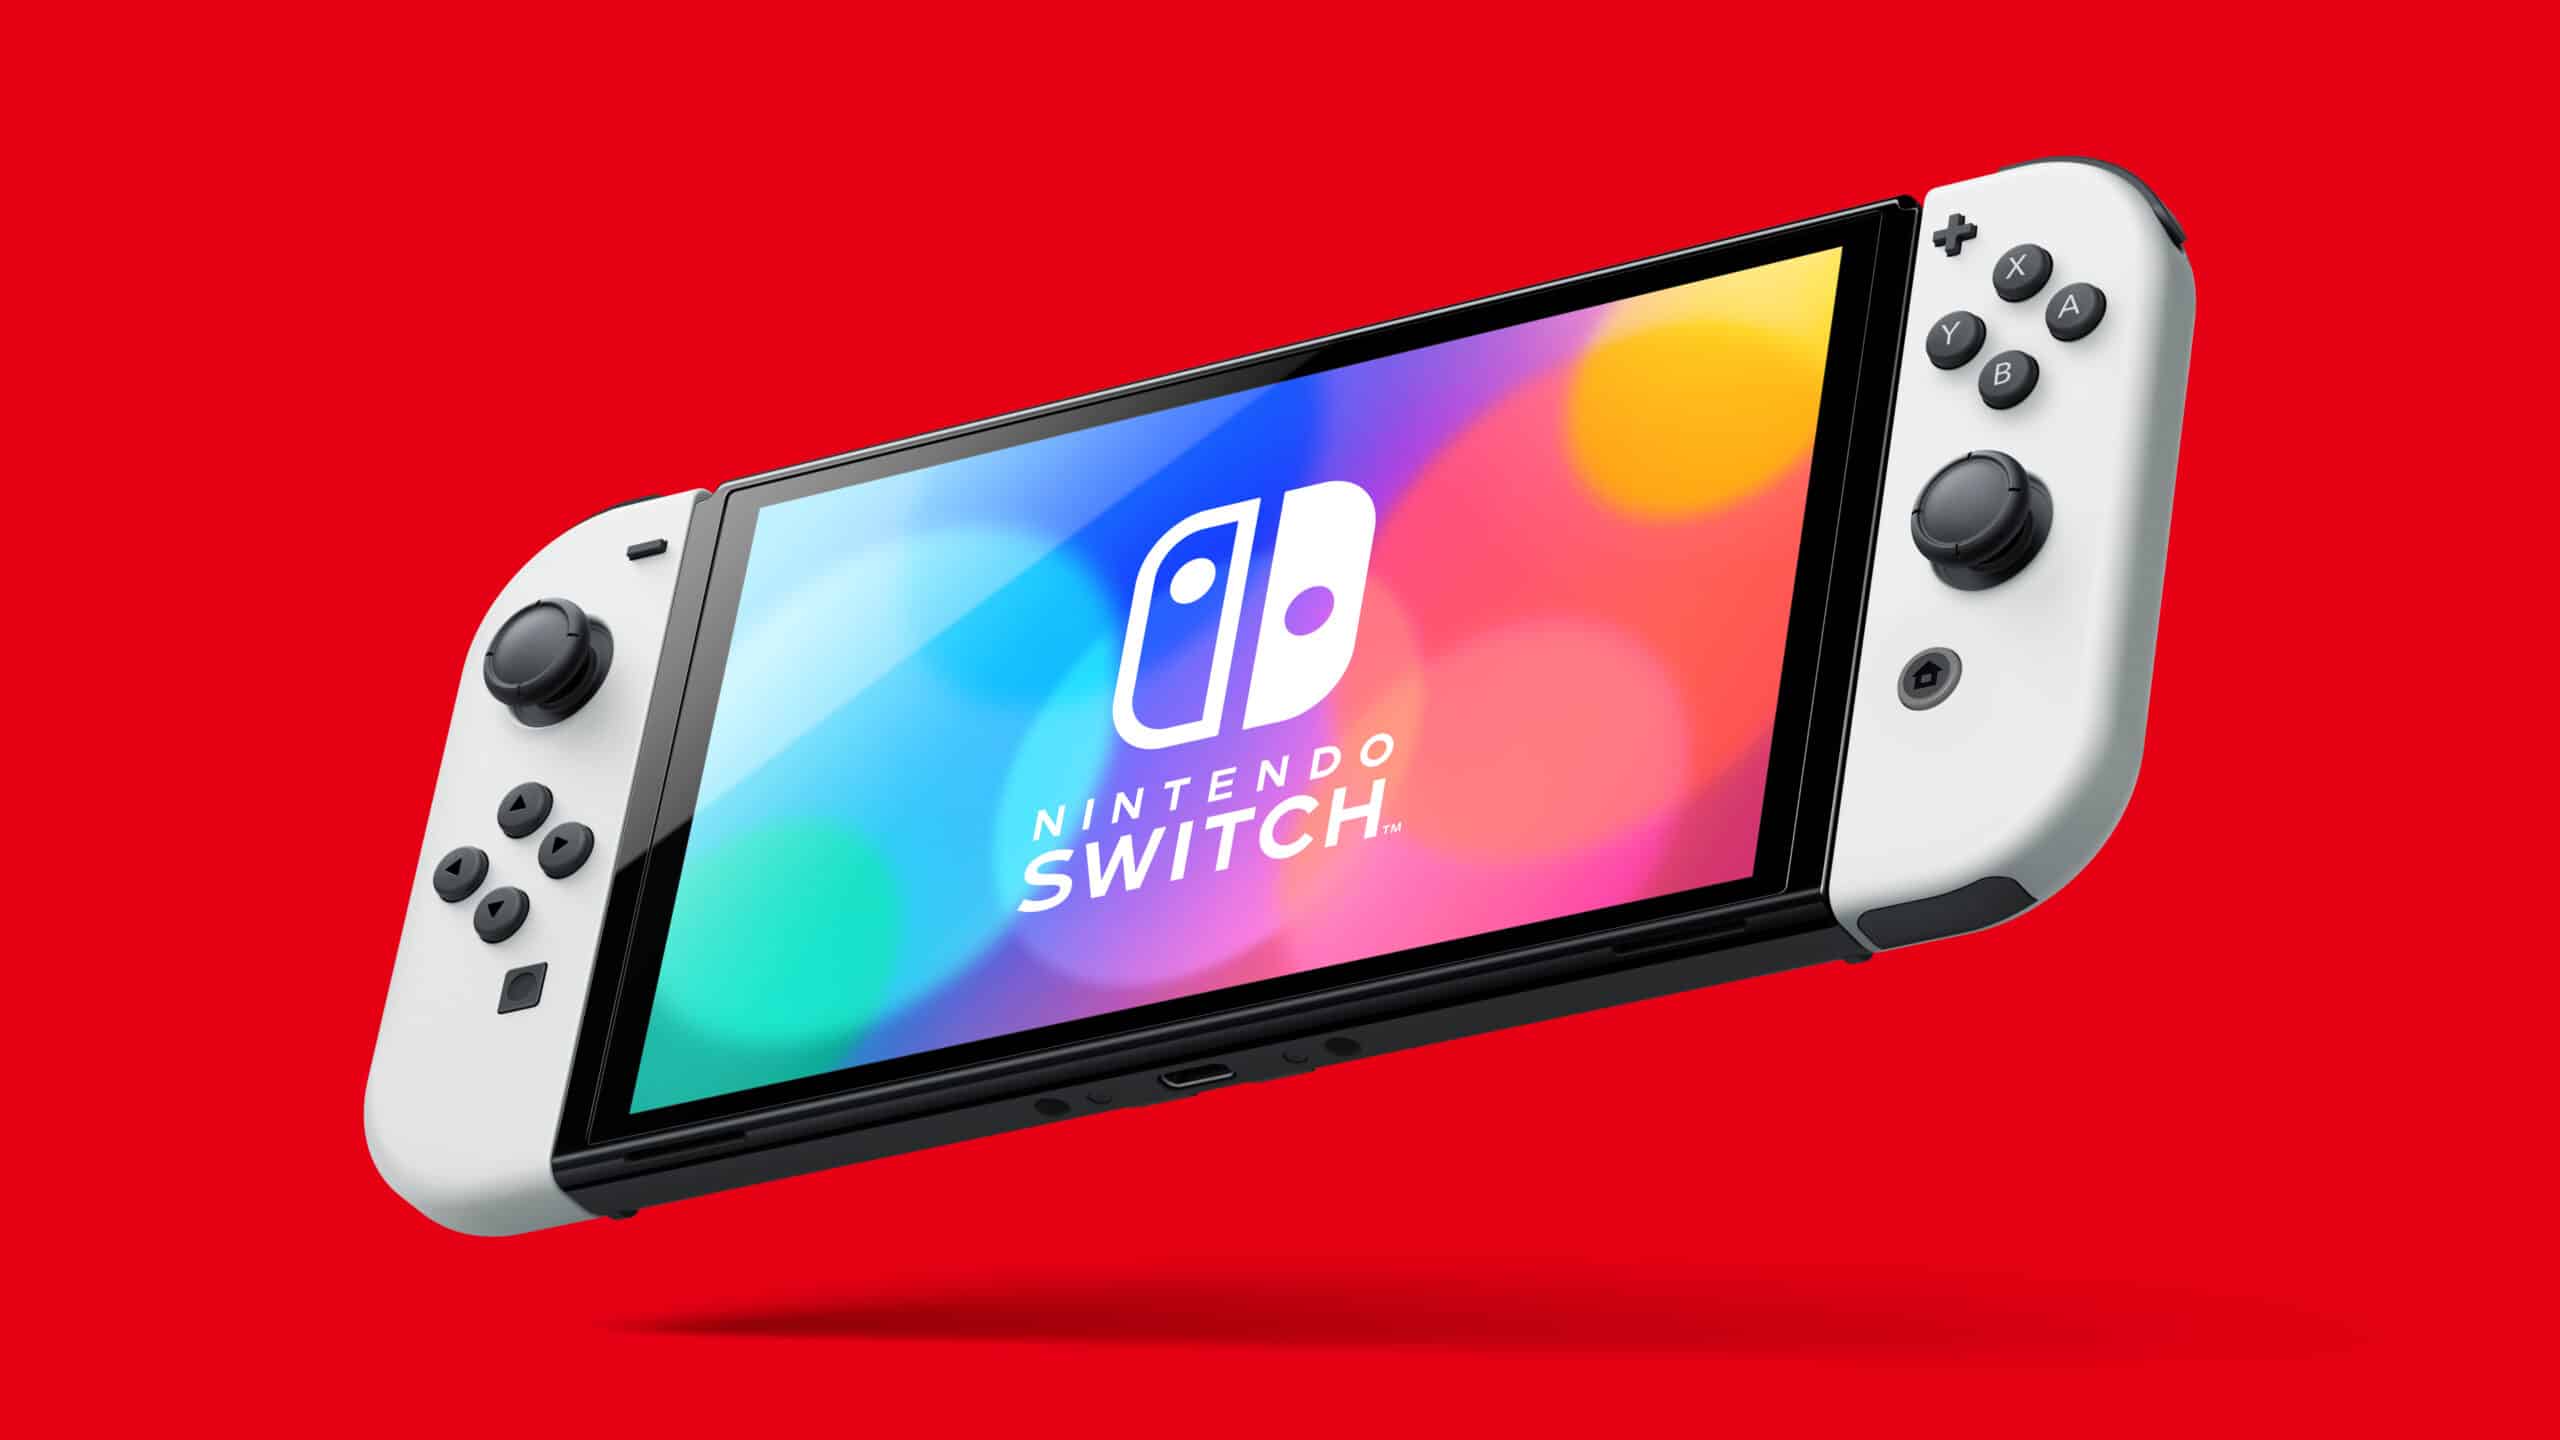 New 2021 Nintendo Switch Games for Family and Single-Player Fun